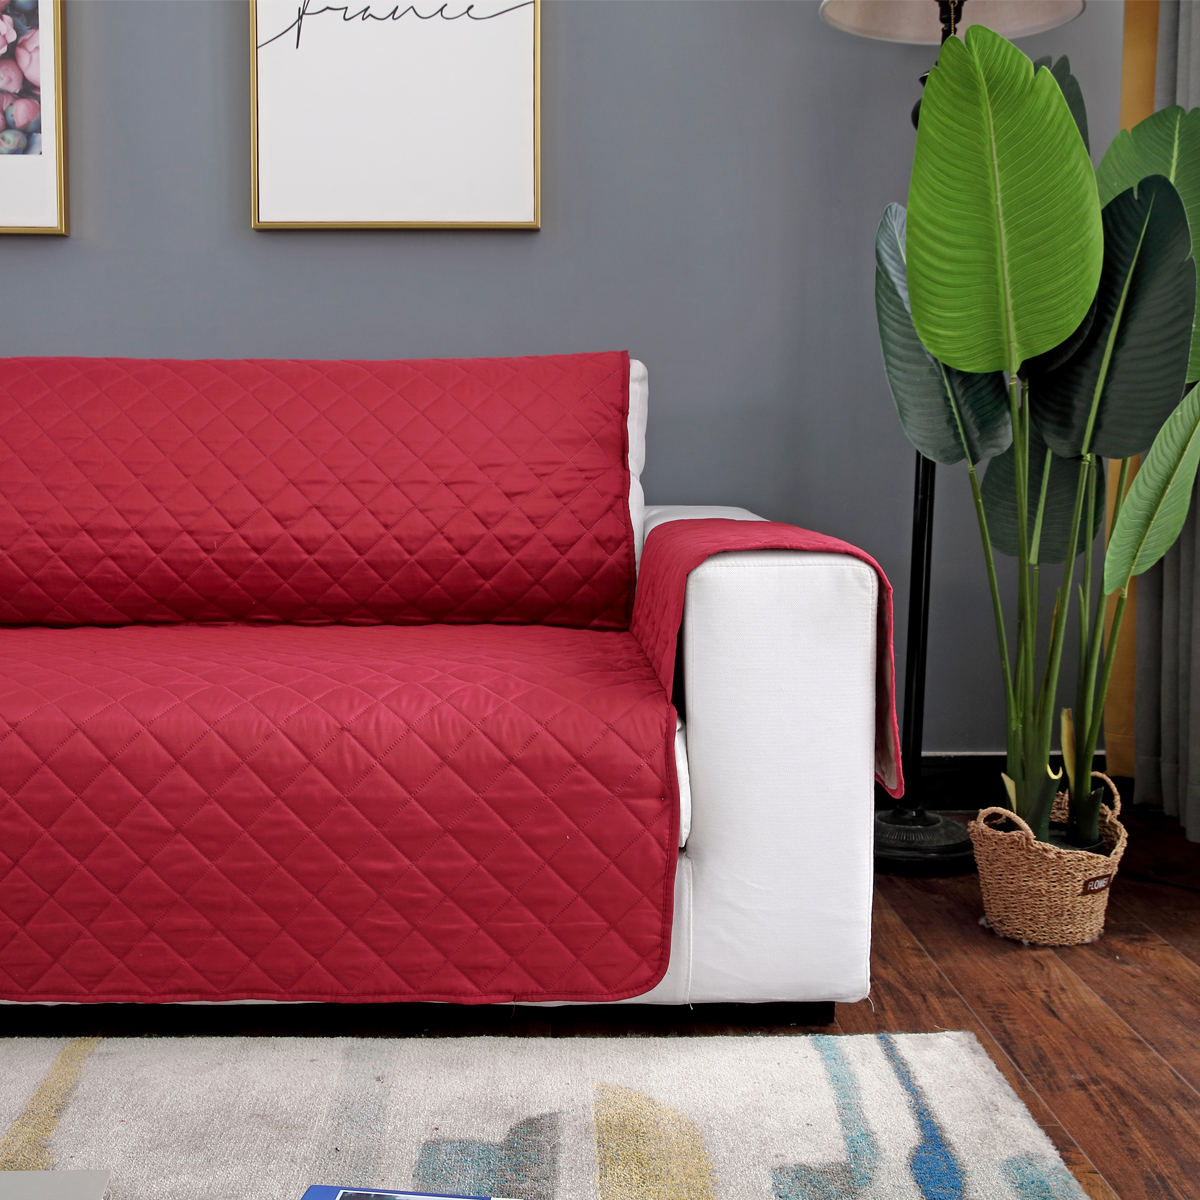 Waterproof-Seat-Printing-Pet-Sofa-Mat-Couch-Protective-Covers-Removable-With-Strap-1468136-7